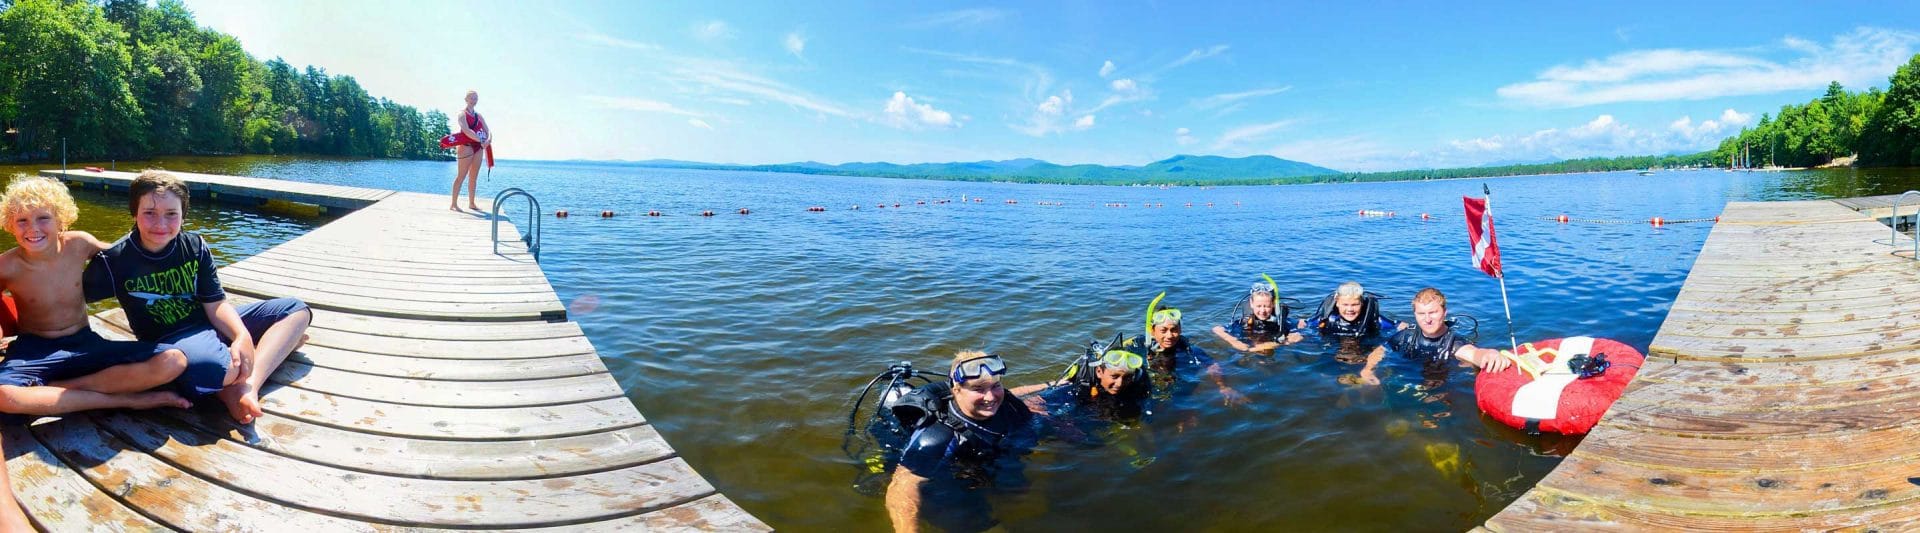 group of young campers practicing scuba diving at the lake